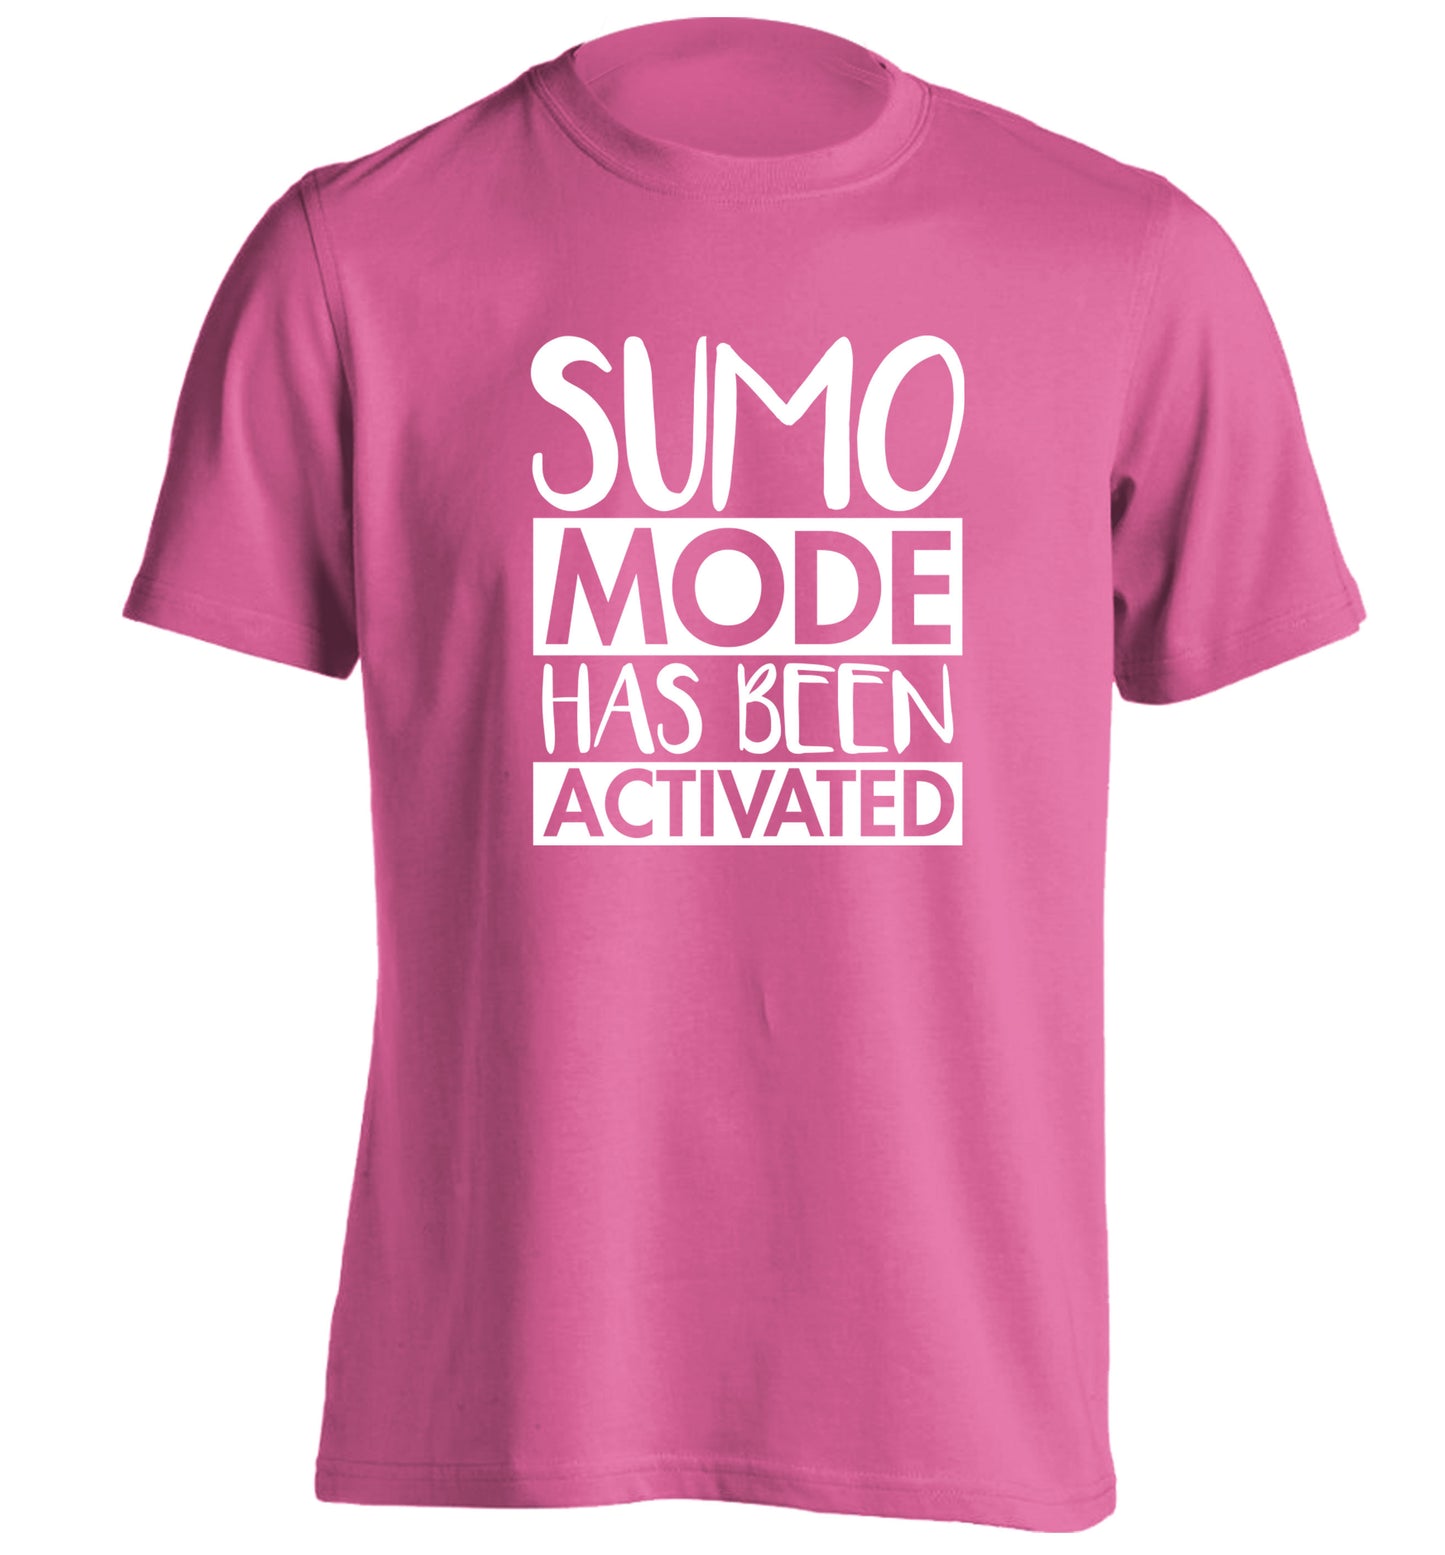 Sumo mode activated adults unisex pink Tshirt 2XL